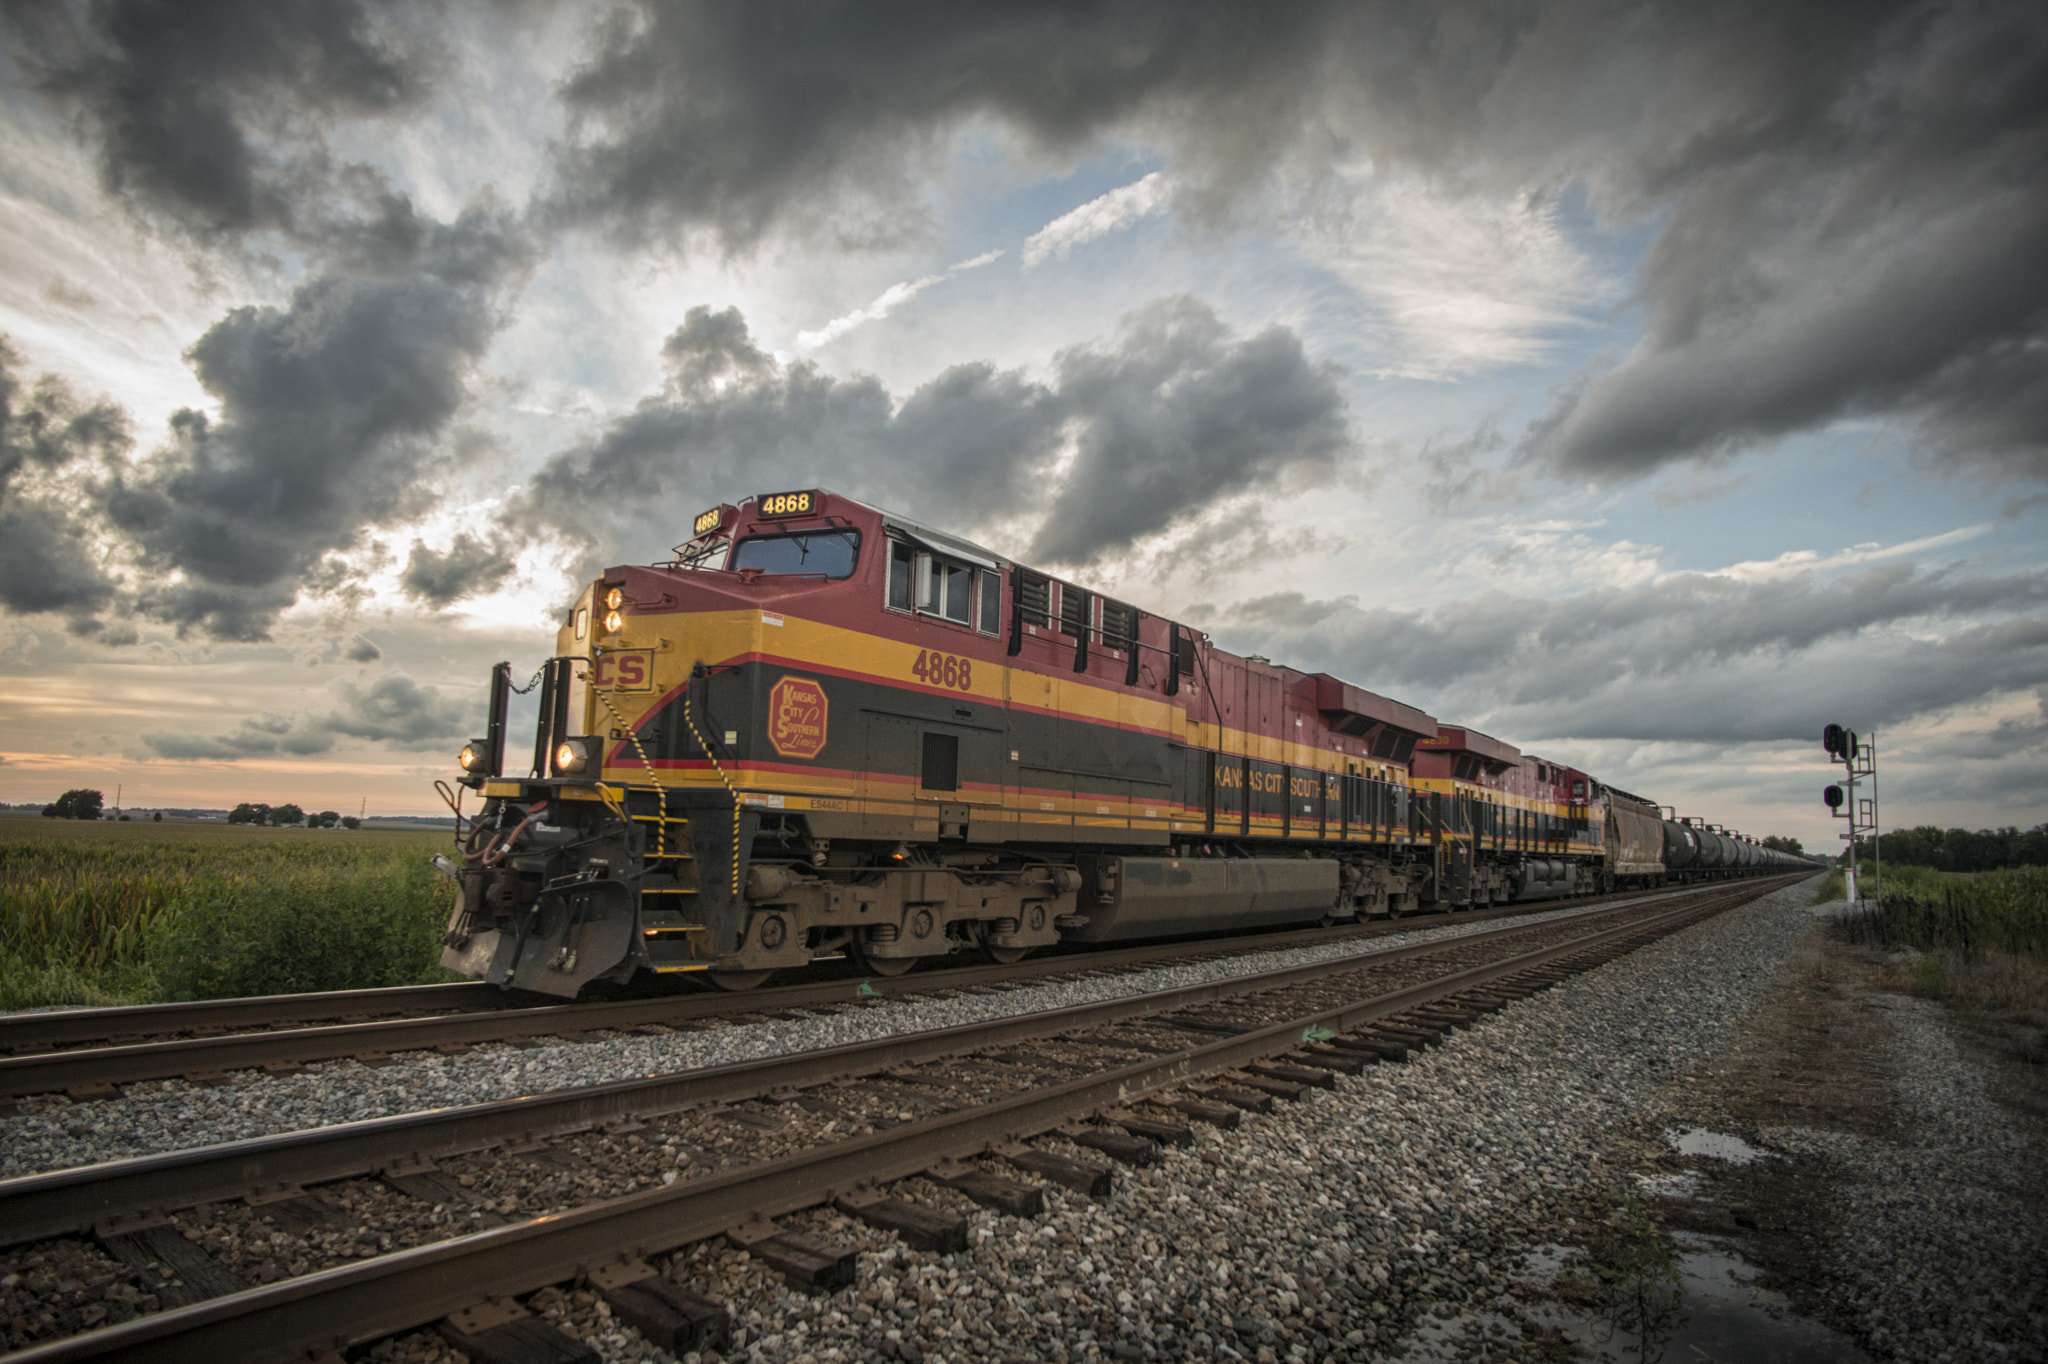 Nikon D800 sample photo. Csx ksb with kcs units at middle king ft branch in photography